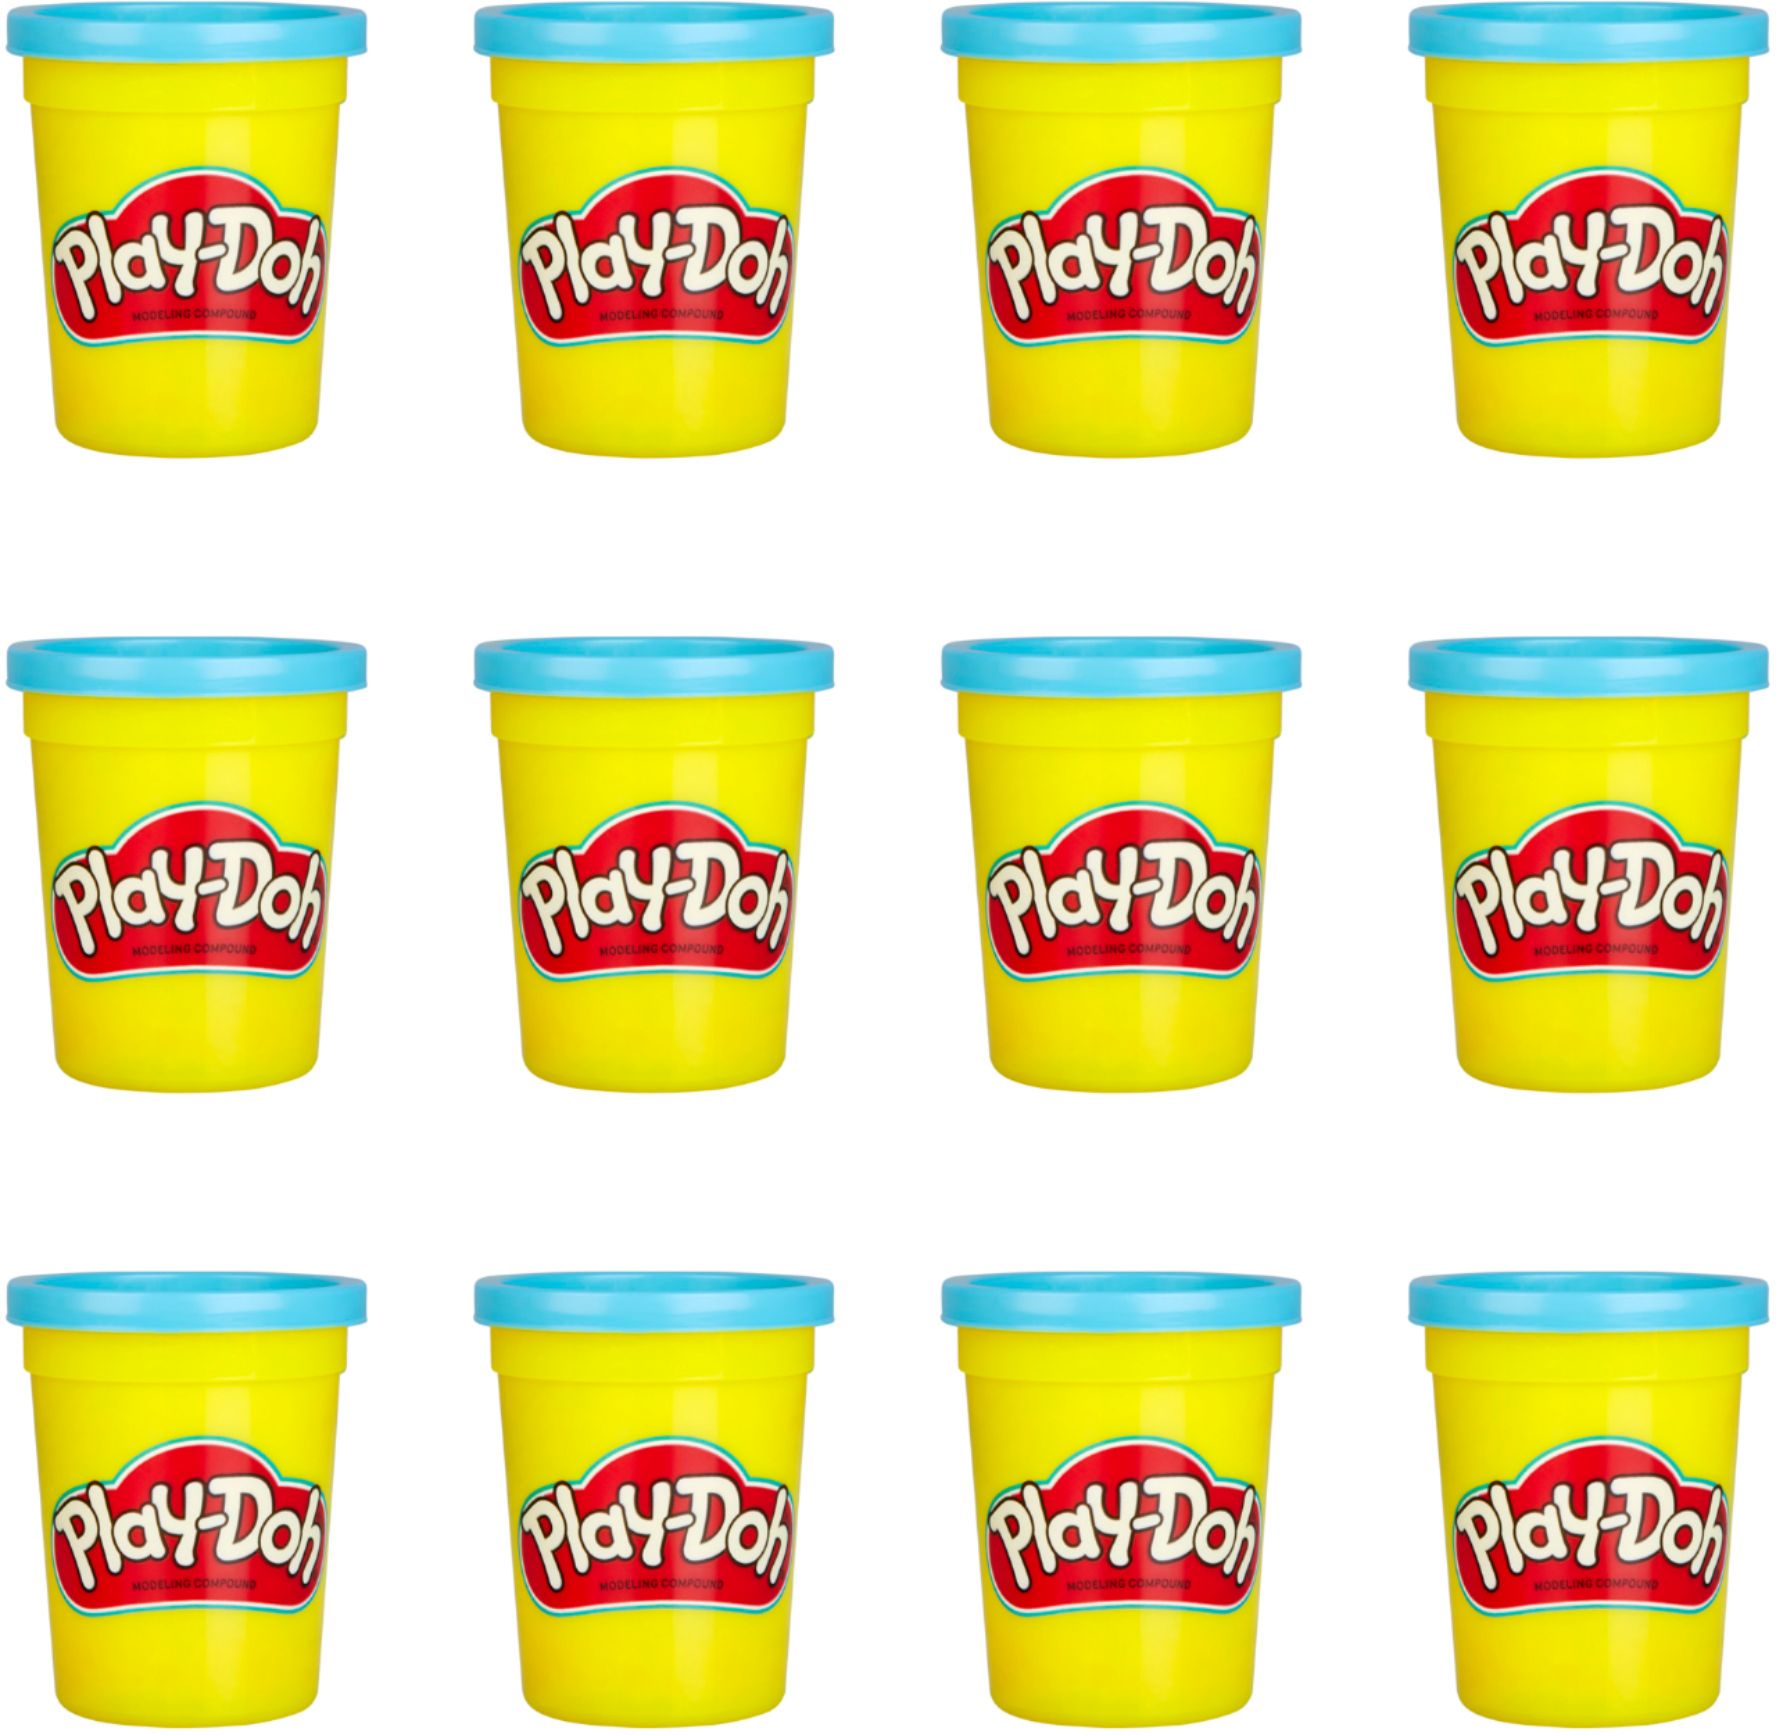 Best Buy: Play-Doh Bulk 12-Pack of Non-Toxic Modeling Compound, 4-Ounce  Cans Blue E4827